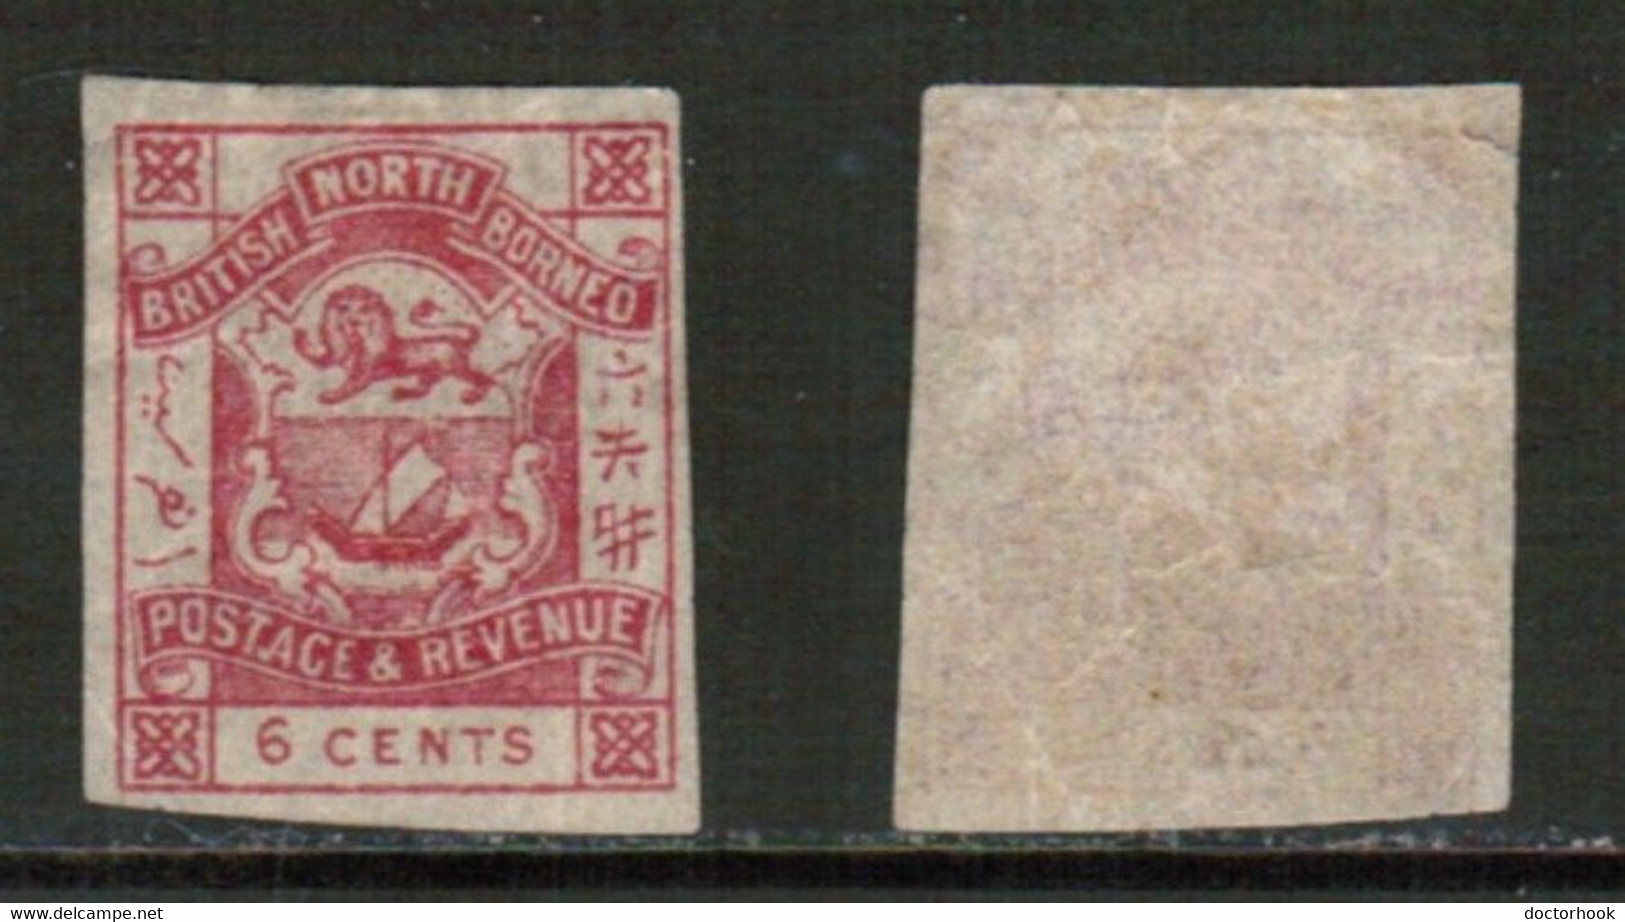 NORTH BORNEO   Scott # 41* MINT HINGED IMPERFORATE Small Fault (CONDITION AS PER SCAN) (WW-2-7) - Borneo Septentrional (...-1963)